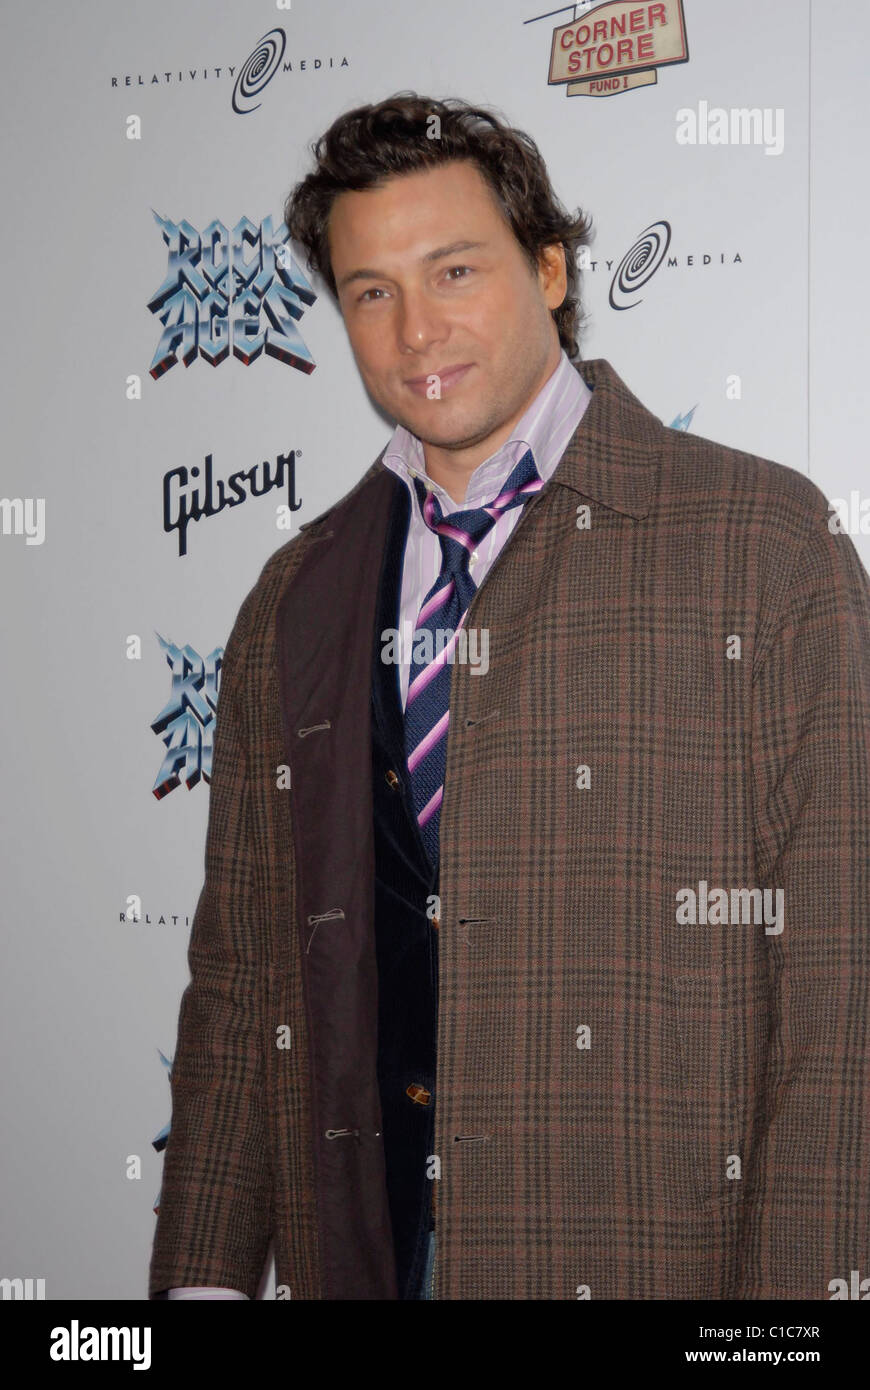 Rocco Dispirito 'Rock of Ages' Broadway Opening Night - Arrivals New York City, USA - 07.04.09 Stock Photo